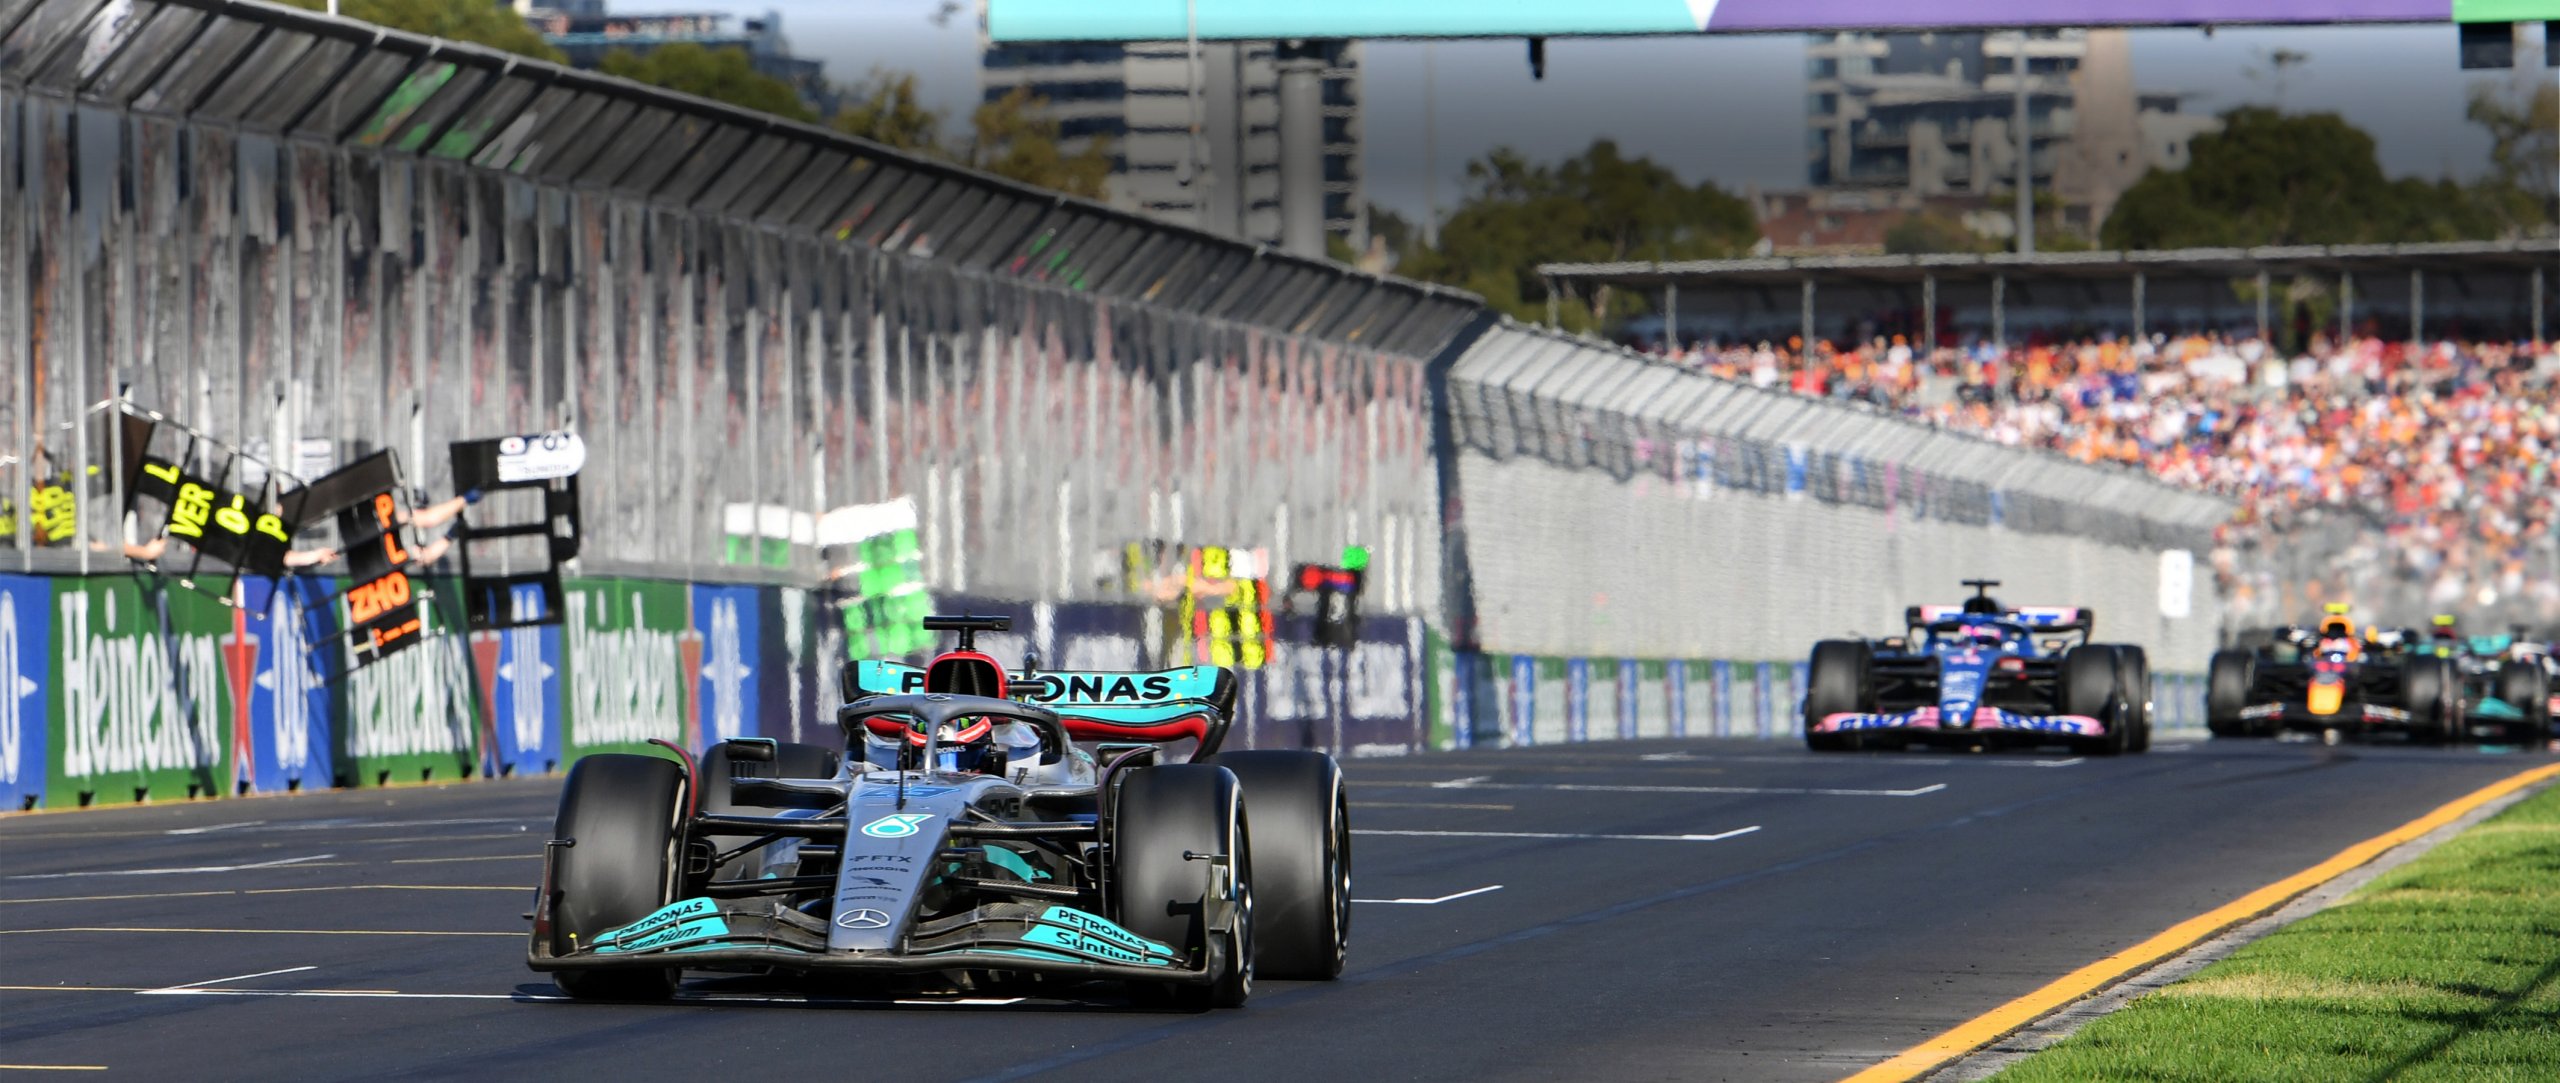 George Secures First Mercedes Podium in Melbourne, Lewis P4